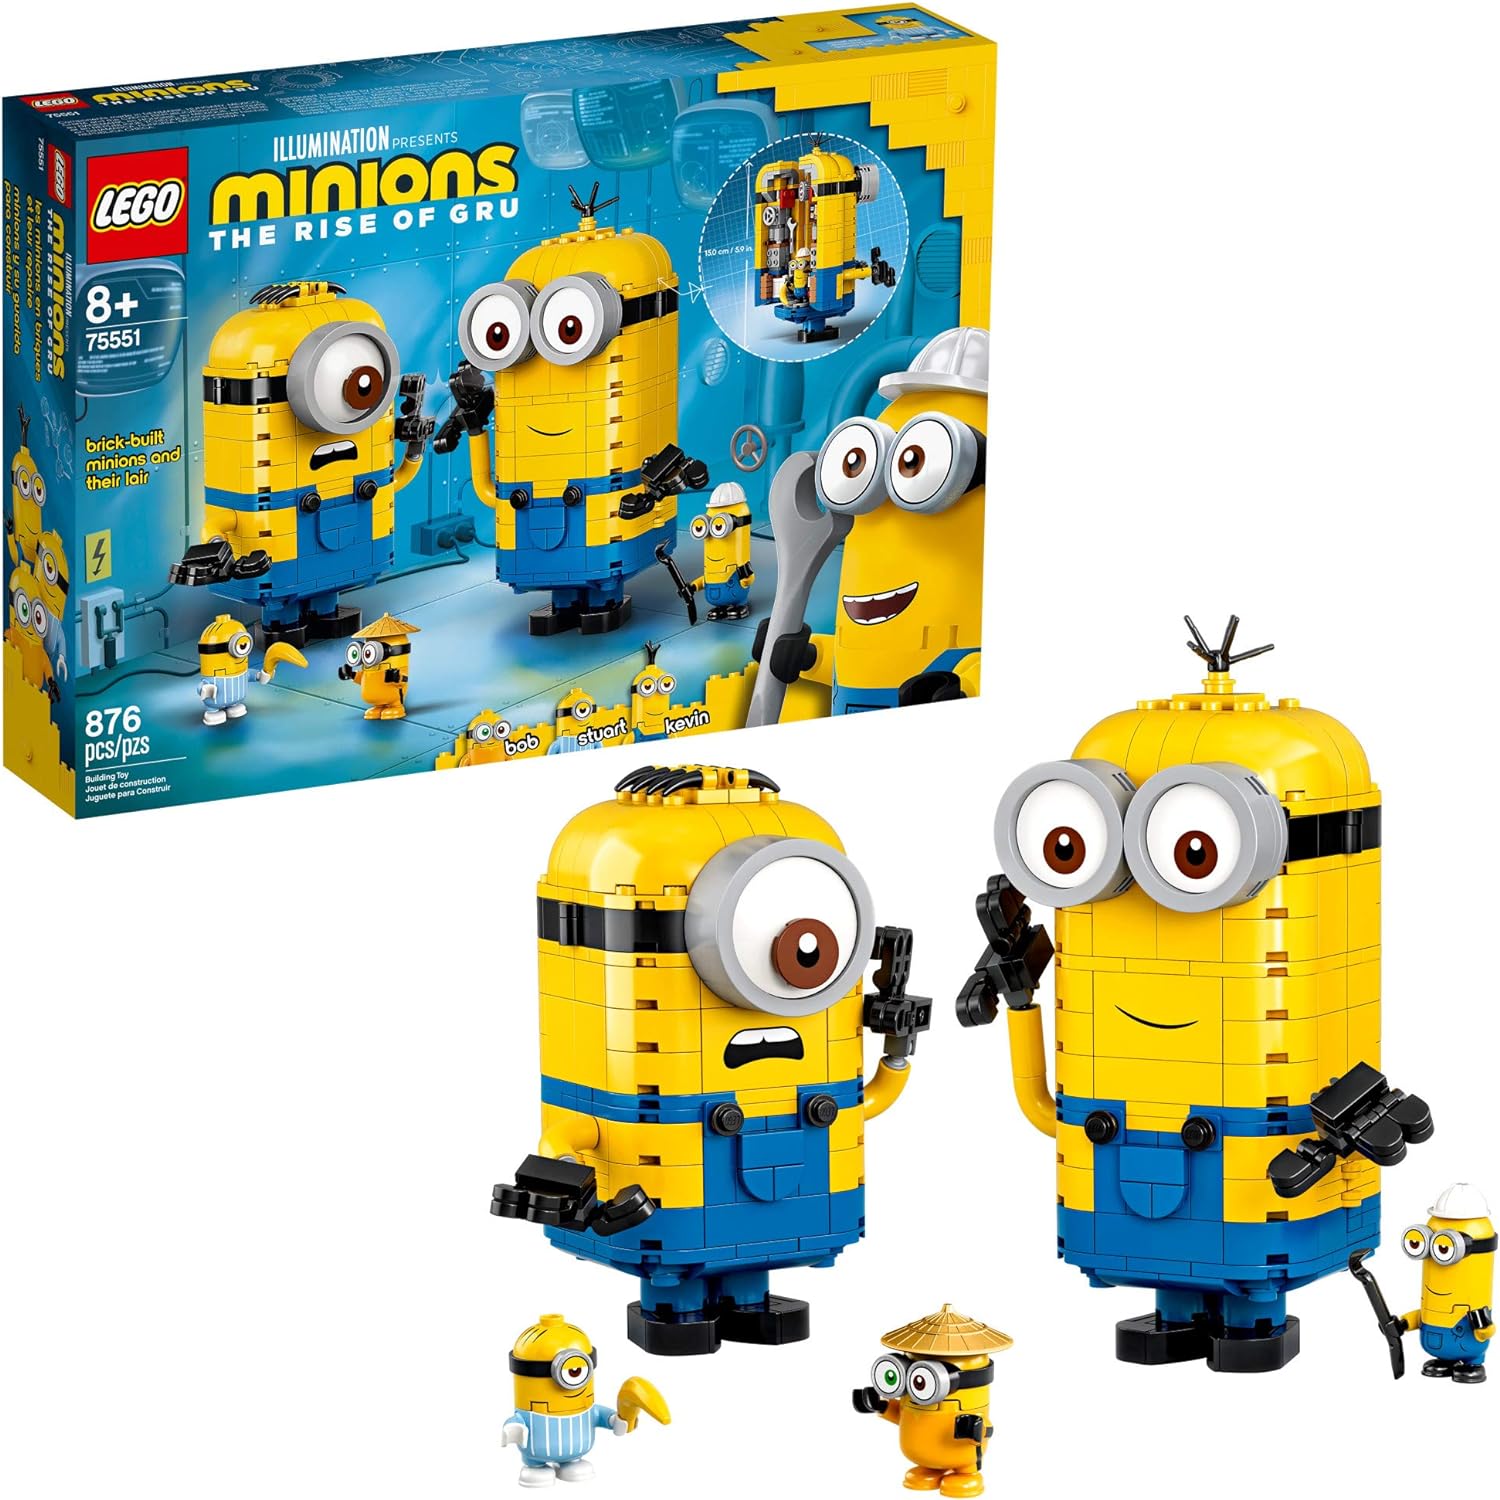 Lego Minions_ The Rise of Gru_ Brick_Built Minions and Their Lair _75551_ Building Set for Kids_ Gre